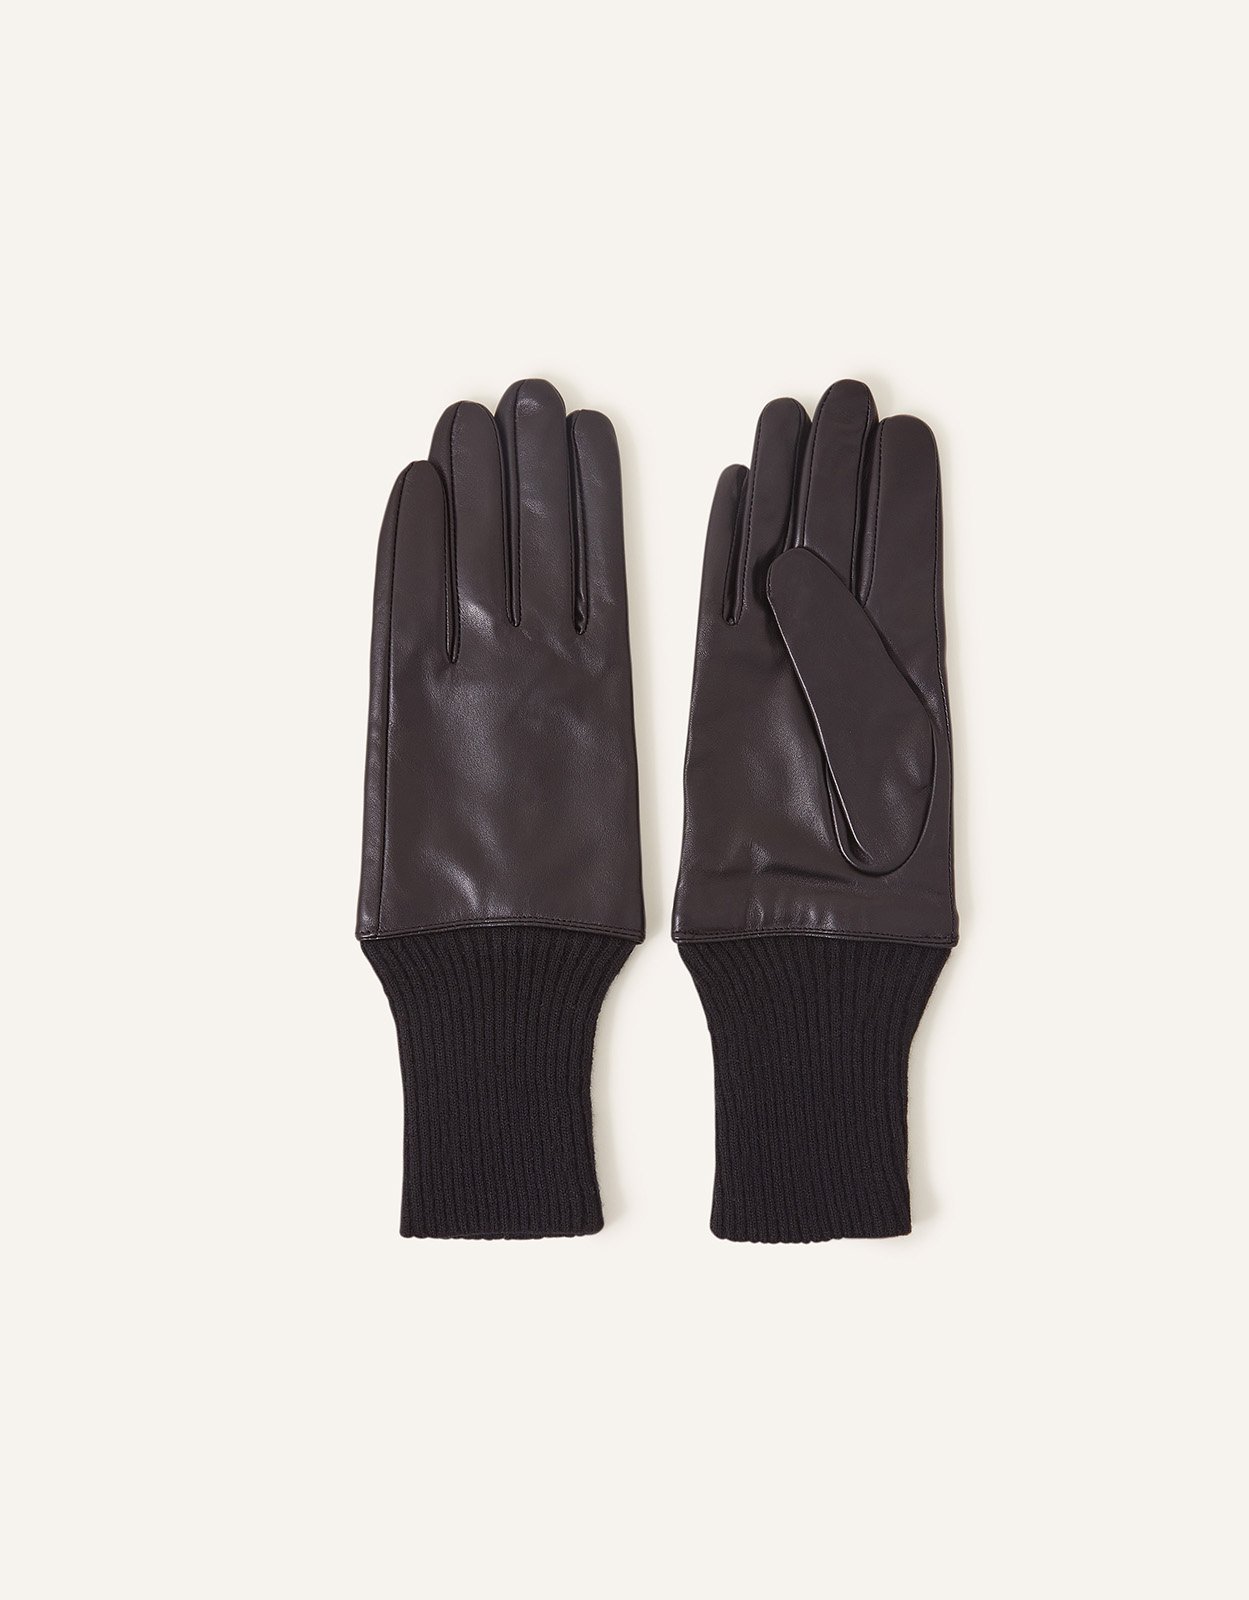 Accessorize Leather Cuff Gloves Black, Size: One Size